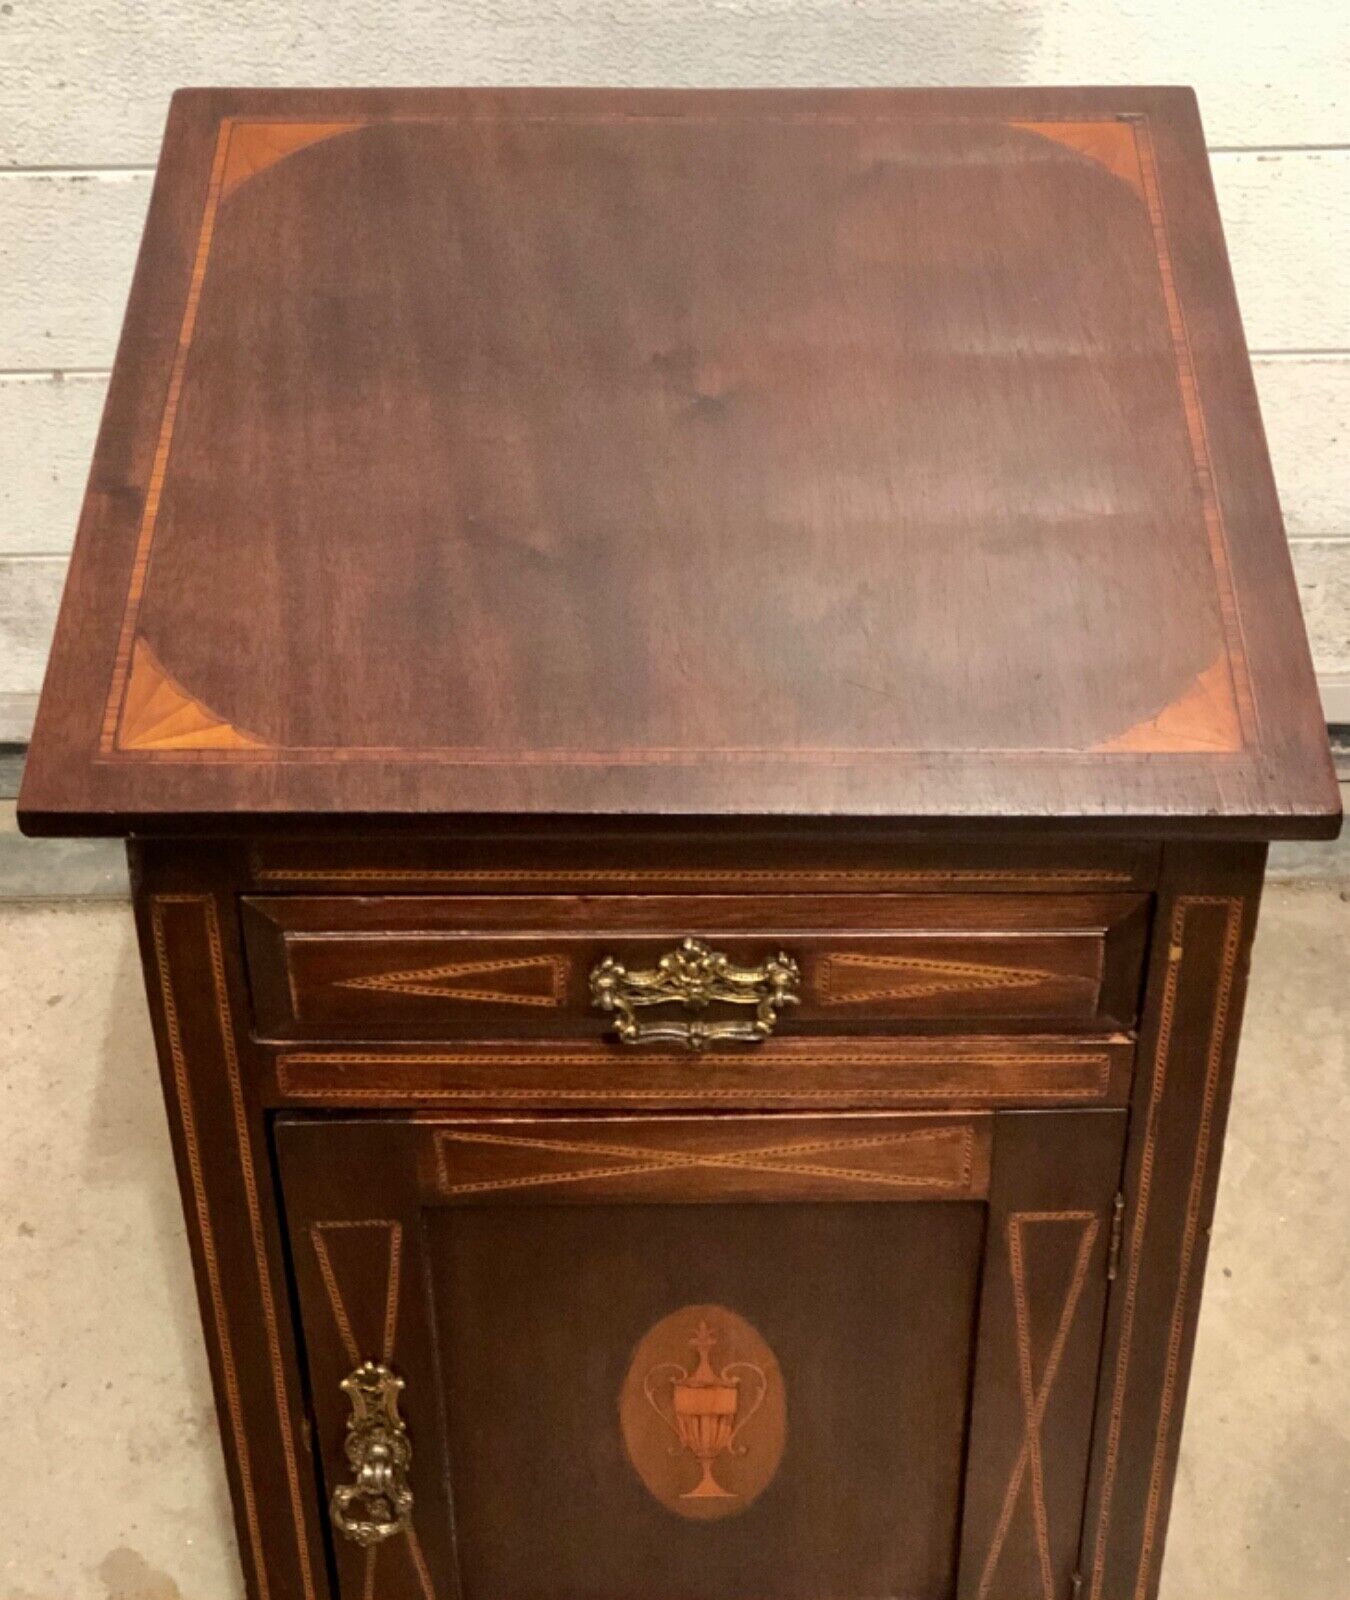 000747....Handsome Edwardian Inlaid Mahogany Bedside Table ( sold )